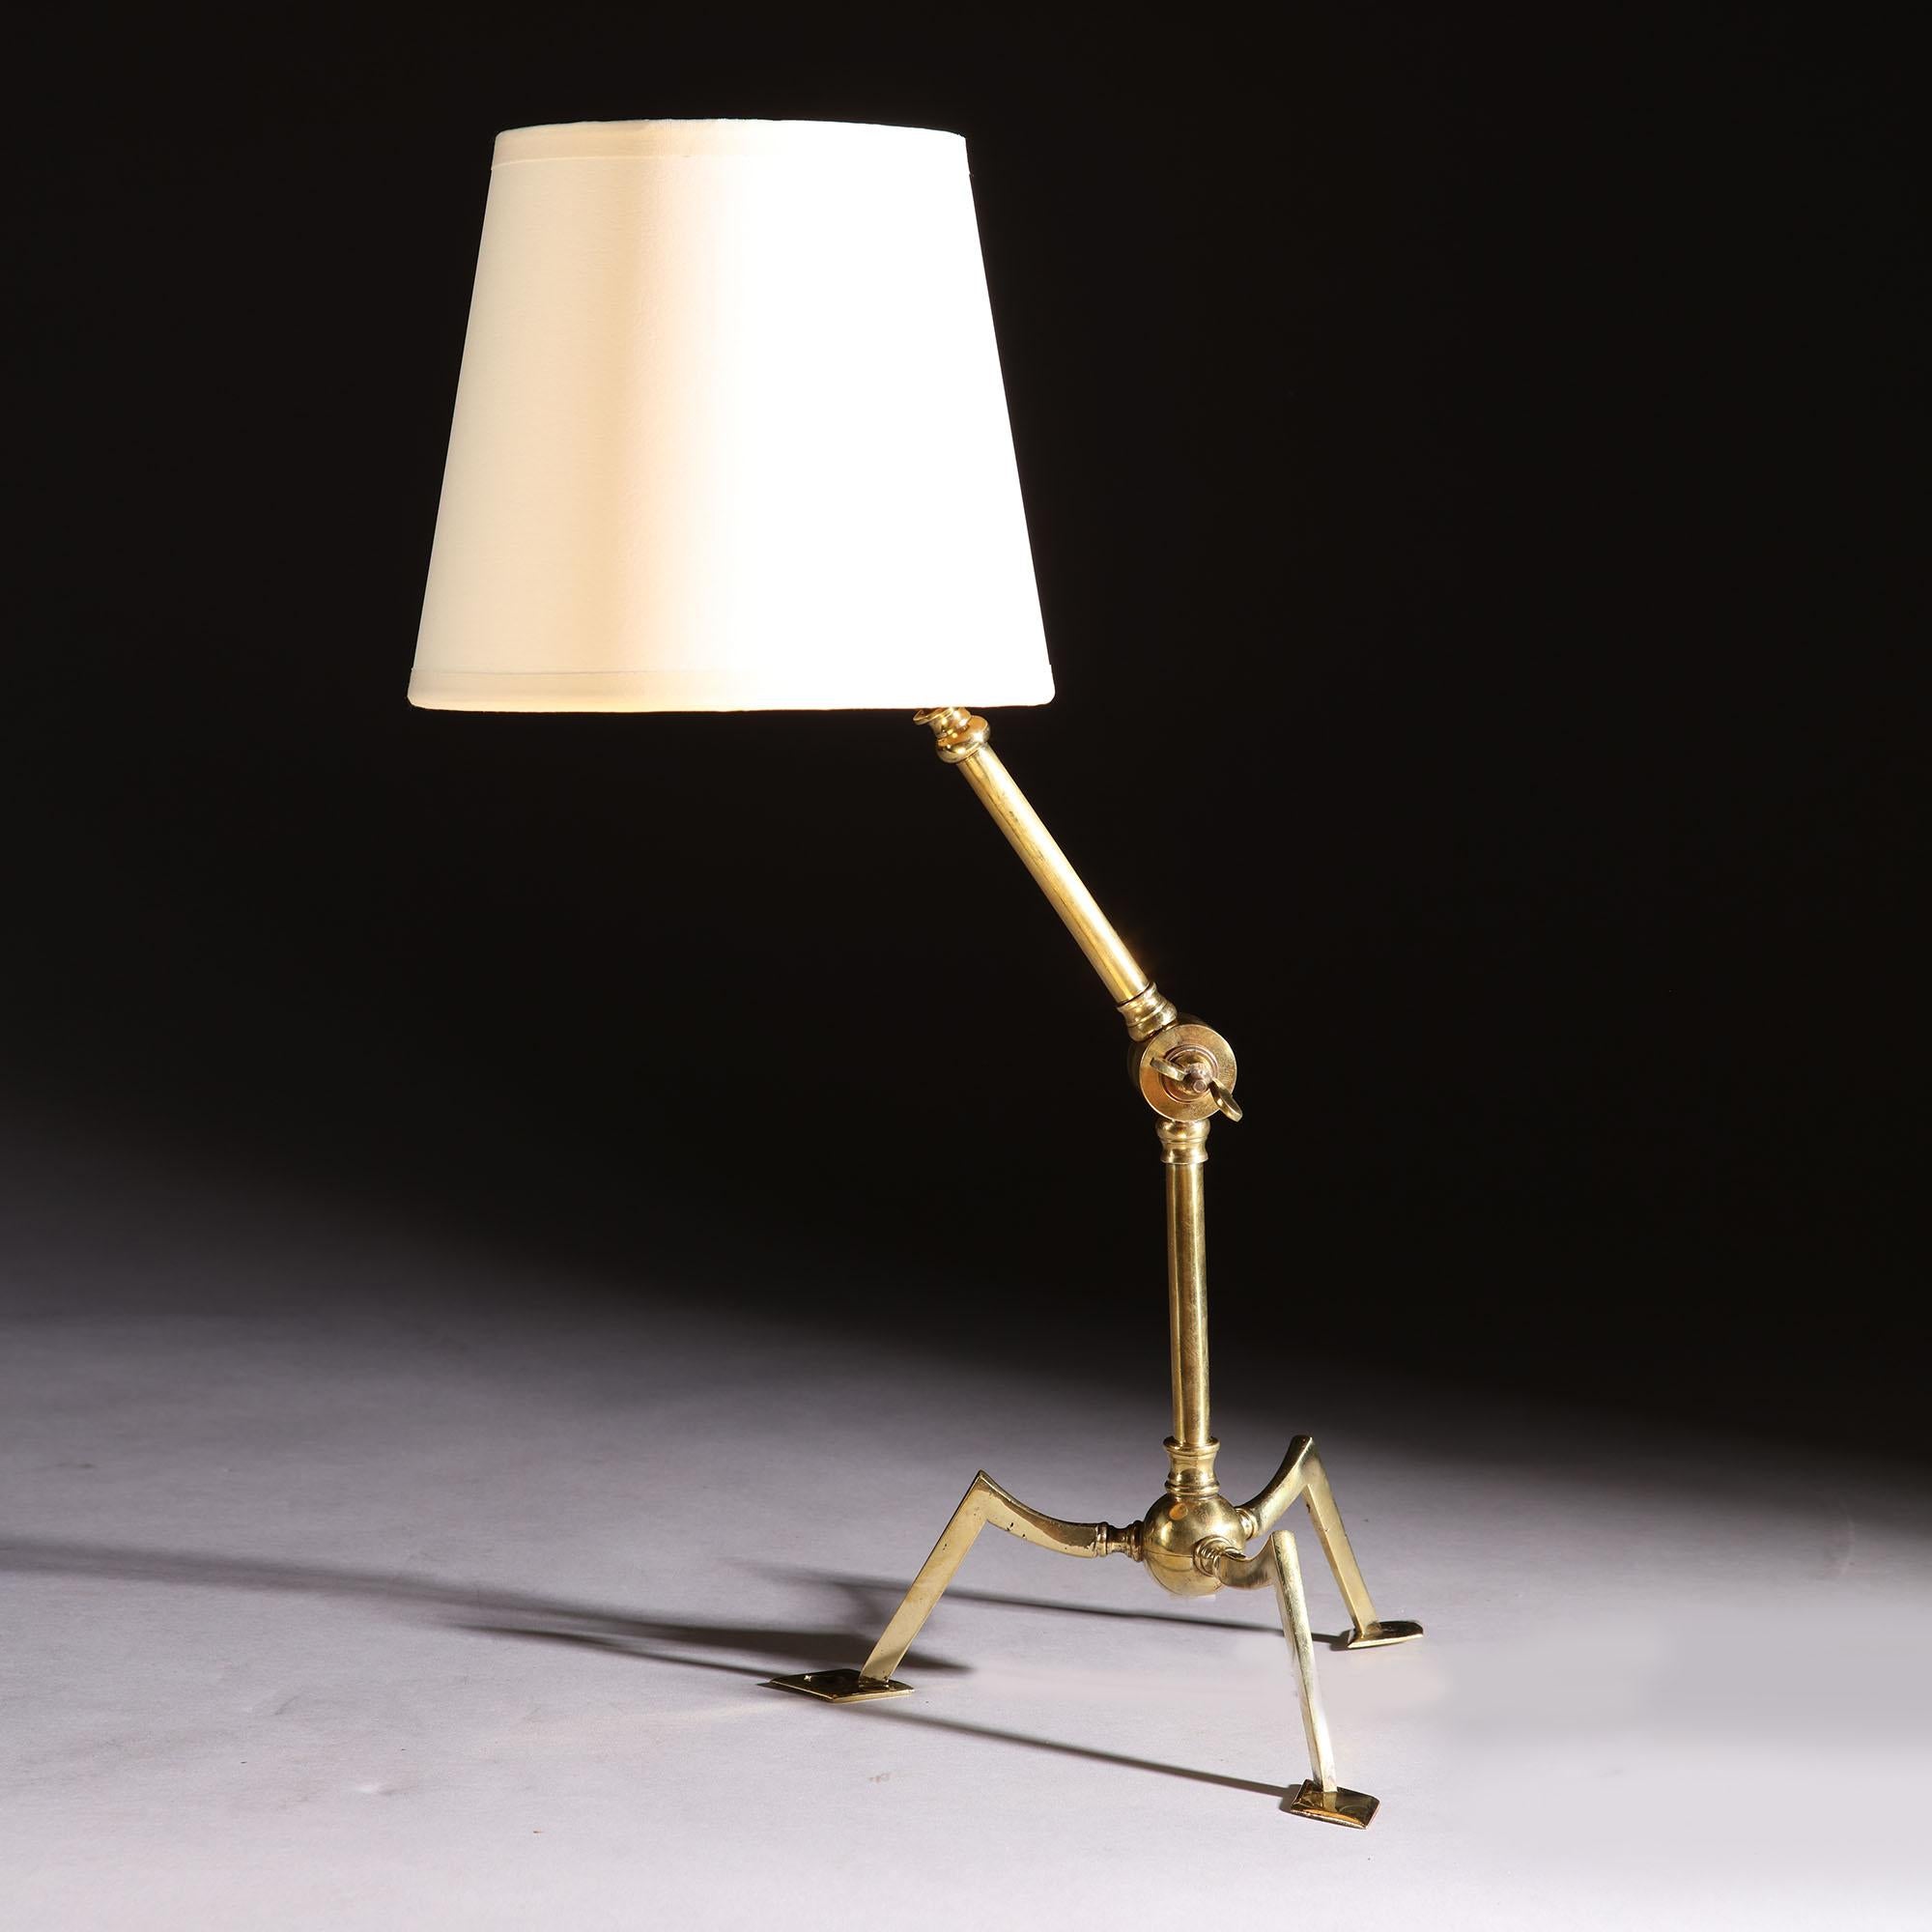 An Arts & Crafts brass tripod lamp by W.A.S Benson, with adjustable arm, adaptable for tabletop or wall-mounted position. 

Benson stamp to the underside of one foot.

Please note: Lampshade not included.

Currently wired for the UK. Please